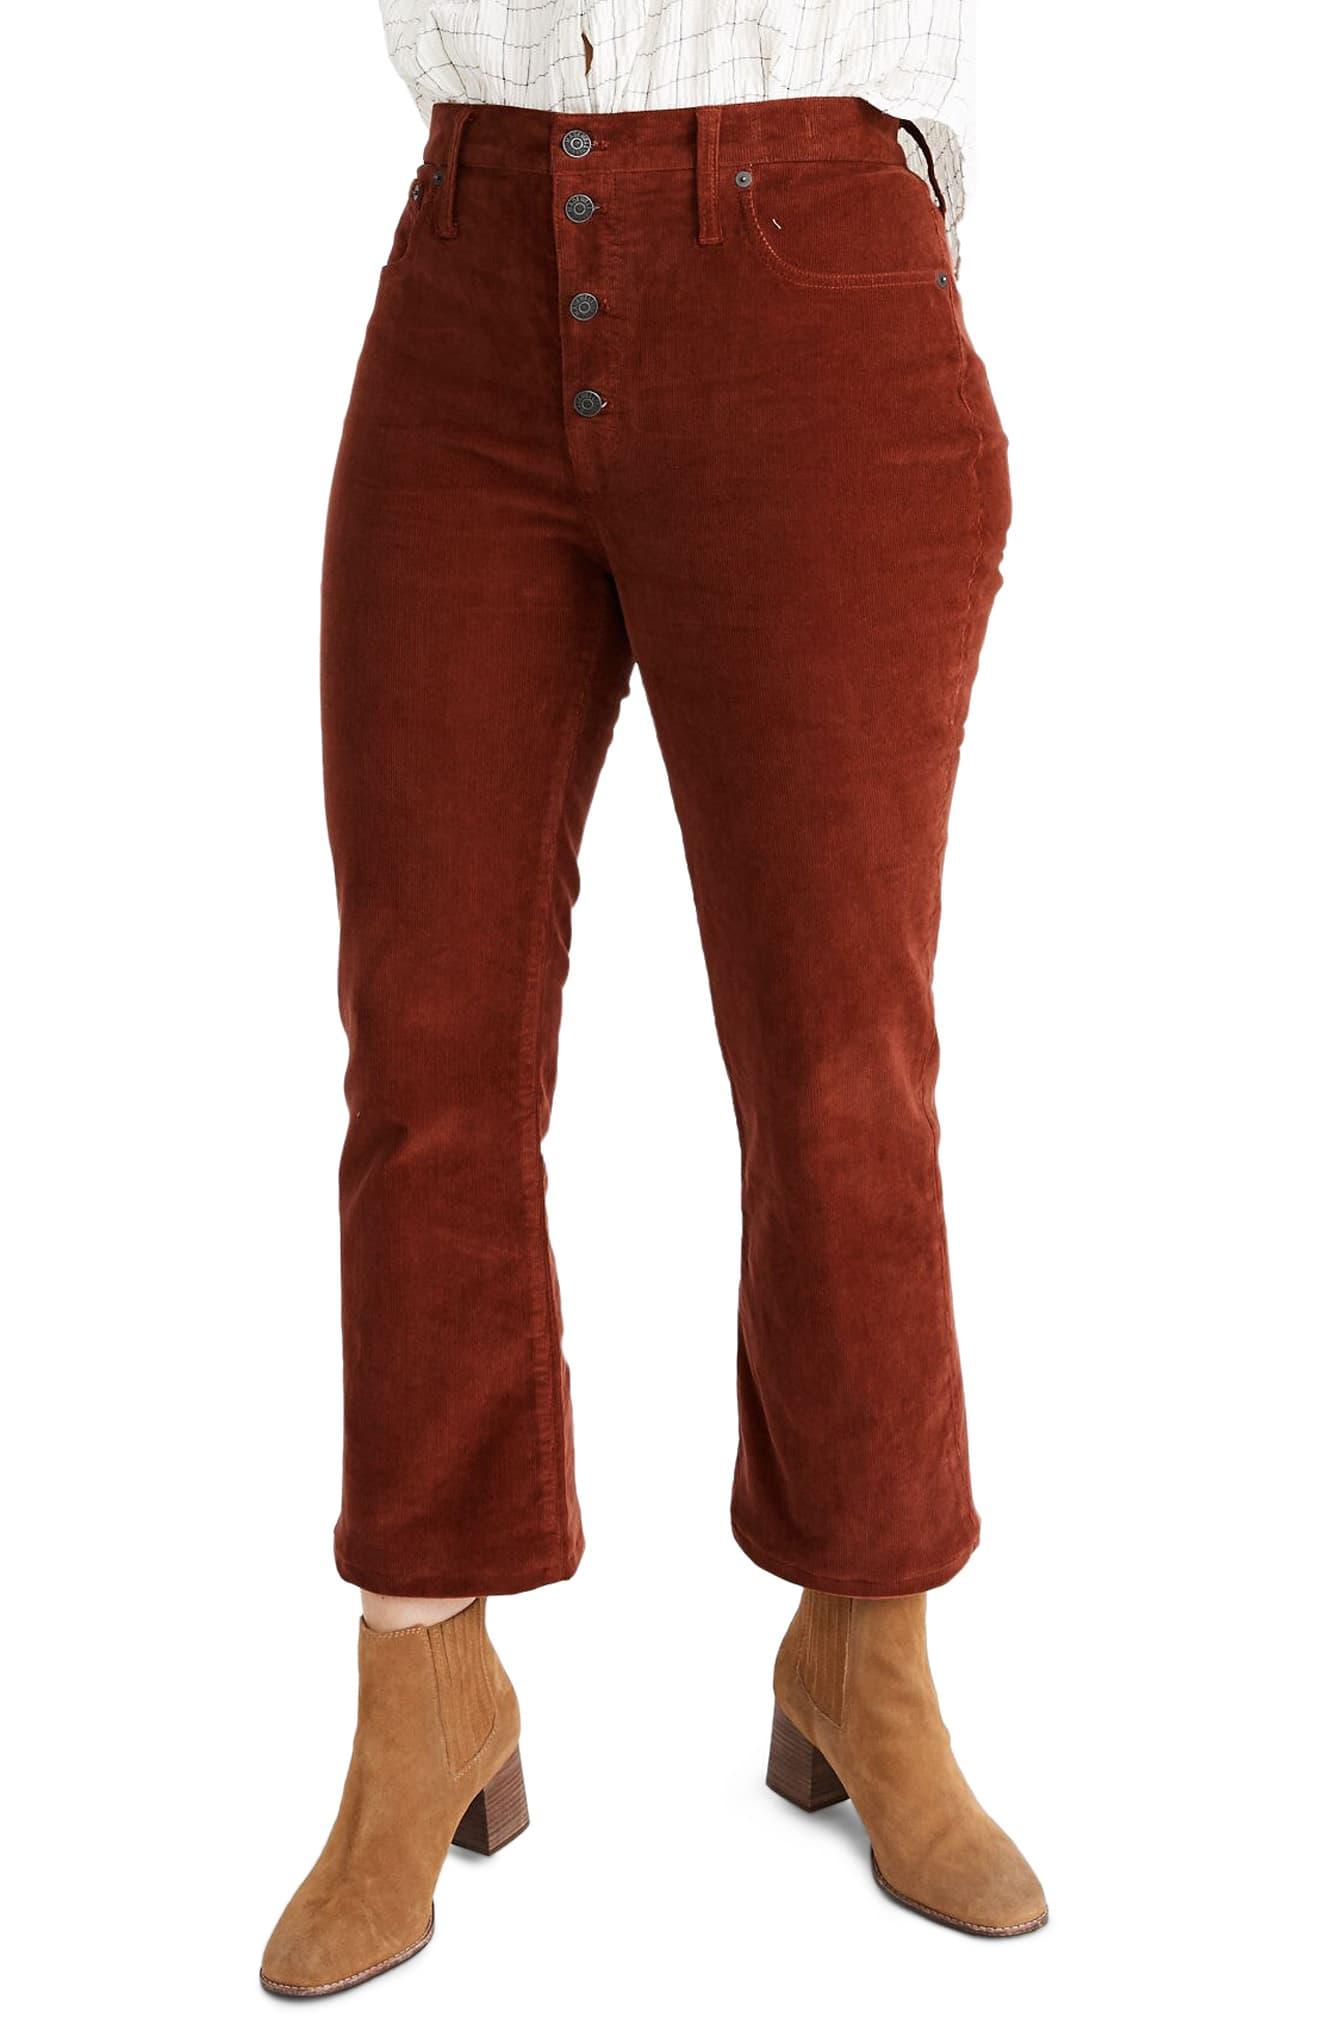 Madewell Cali Button Front Demi-boot Corduroy Pants in Red - Lyst